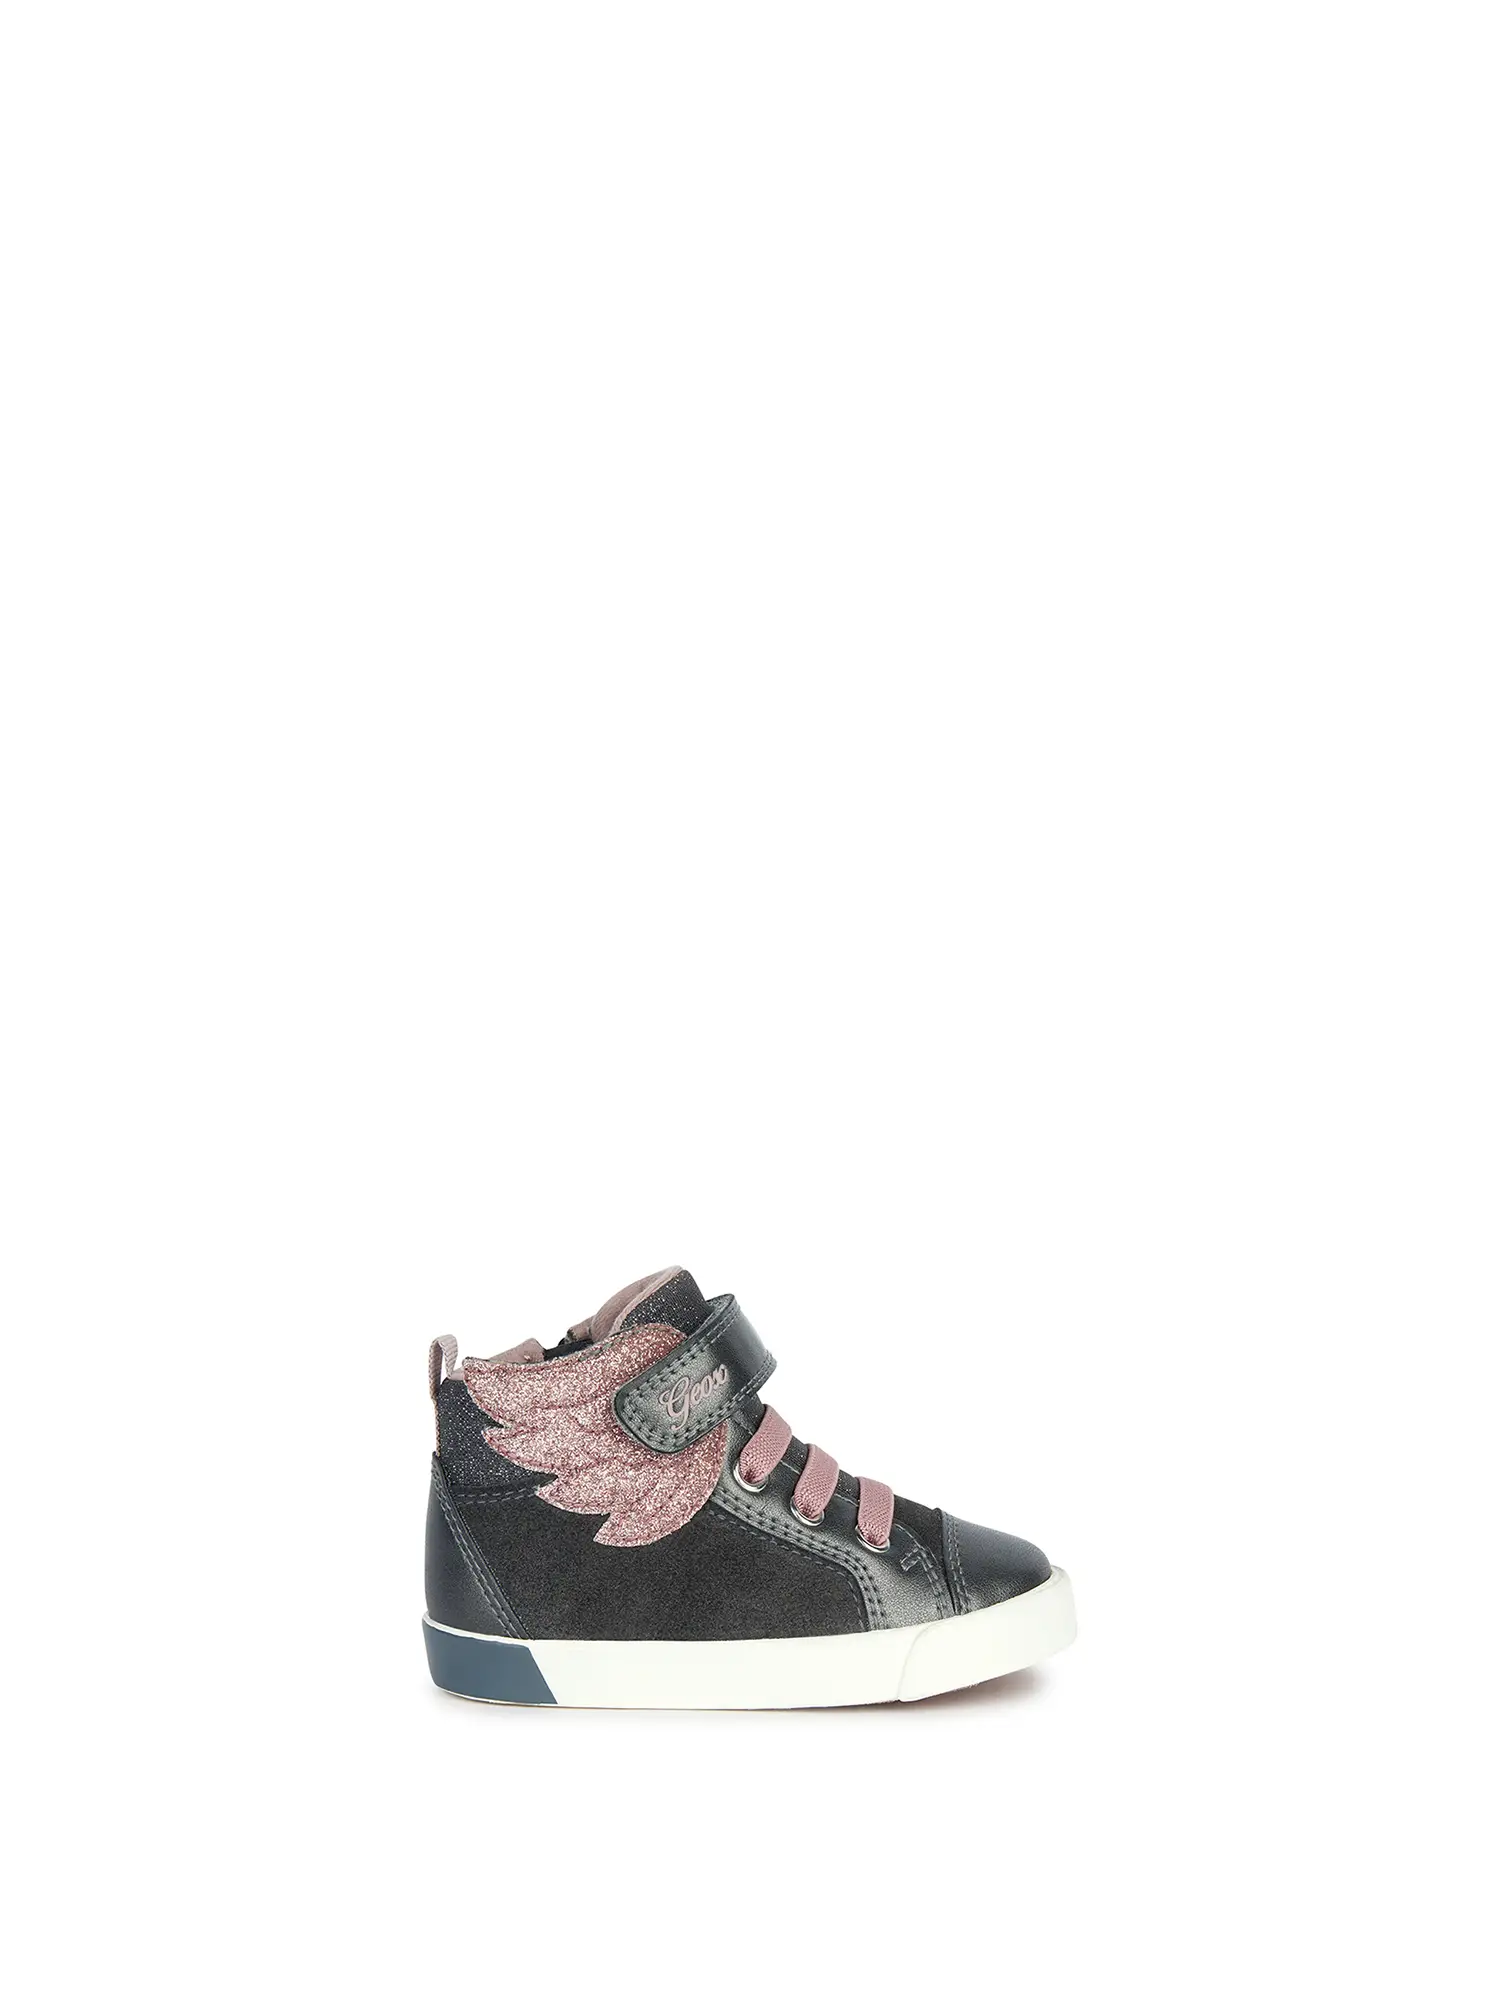 SNEAKERS BAMBINA - GEOX - B36D5A 022NF - GRIGIO/ROSA, 22